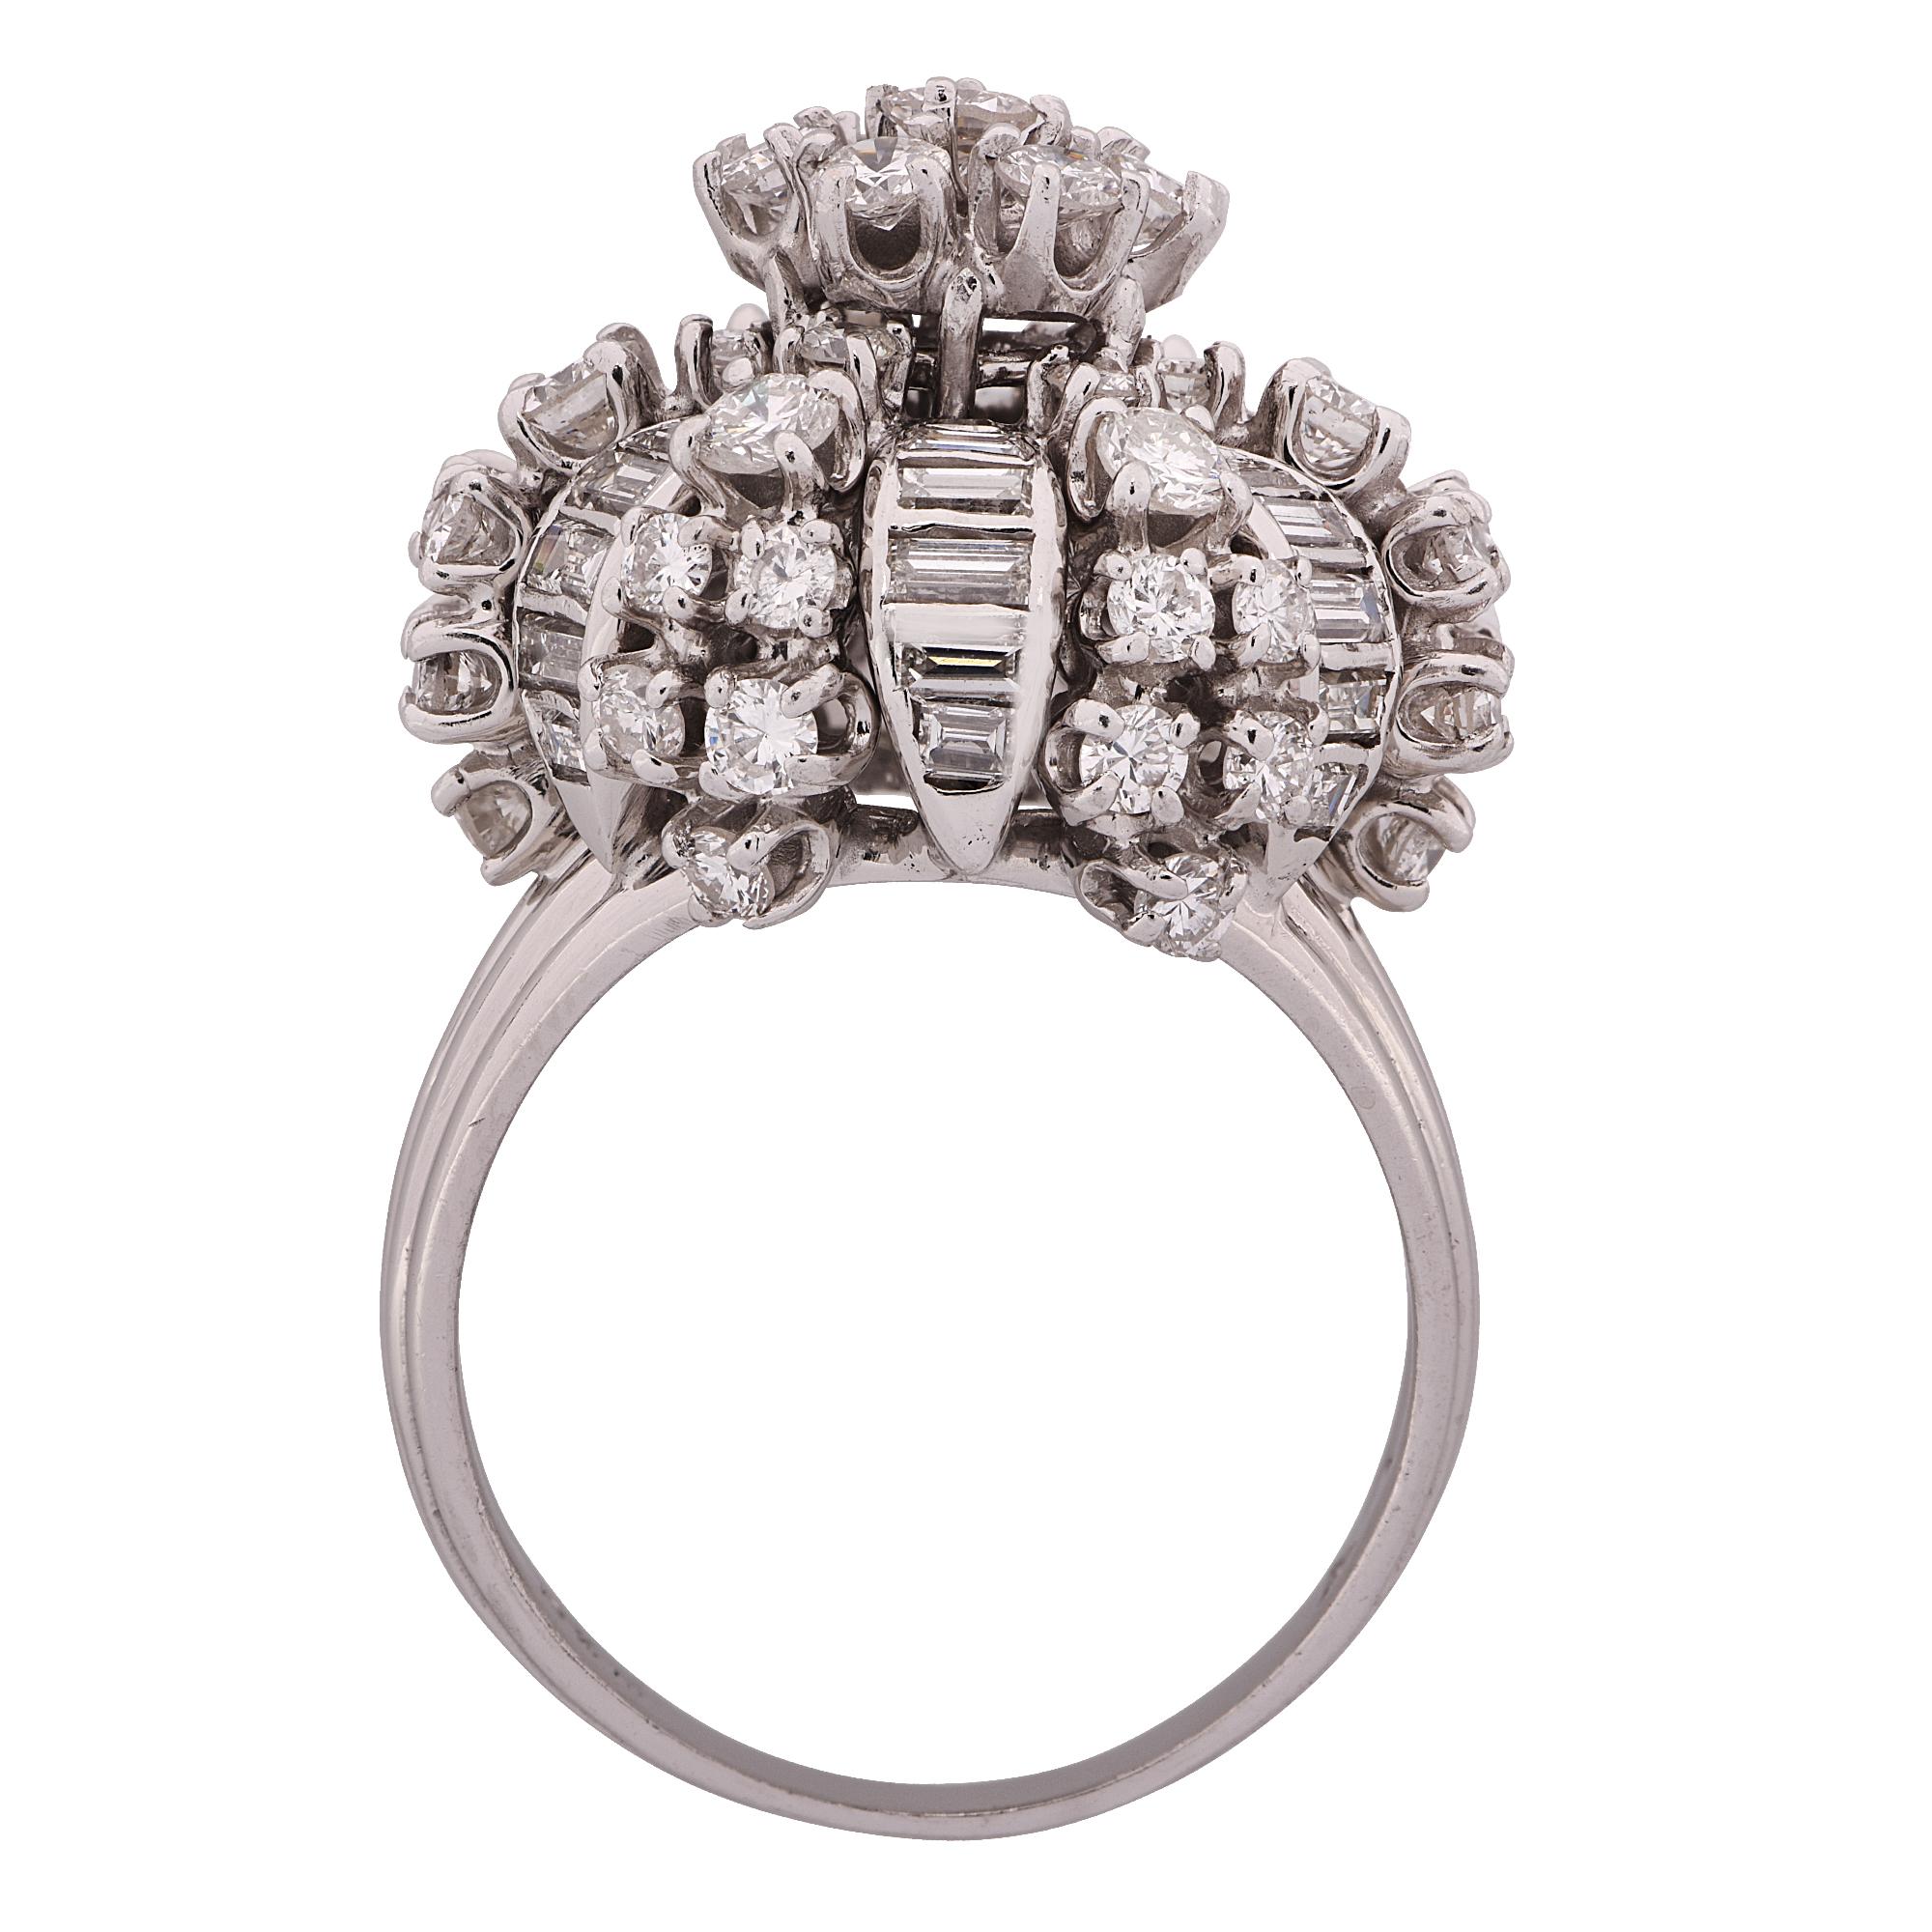 Bombe ring crafted in platinum, featuring approximately 4.5 carats total of round brilliant cut and baguette cut diamonds, G color VS clarity. A dainty flower crafted from 7 round brilliant cut diamonds rests in the center of the ring. Diamond rays